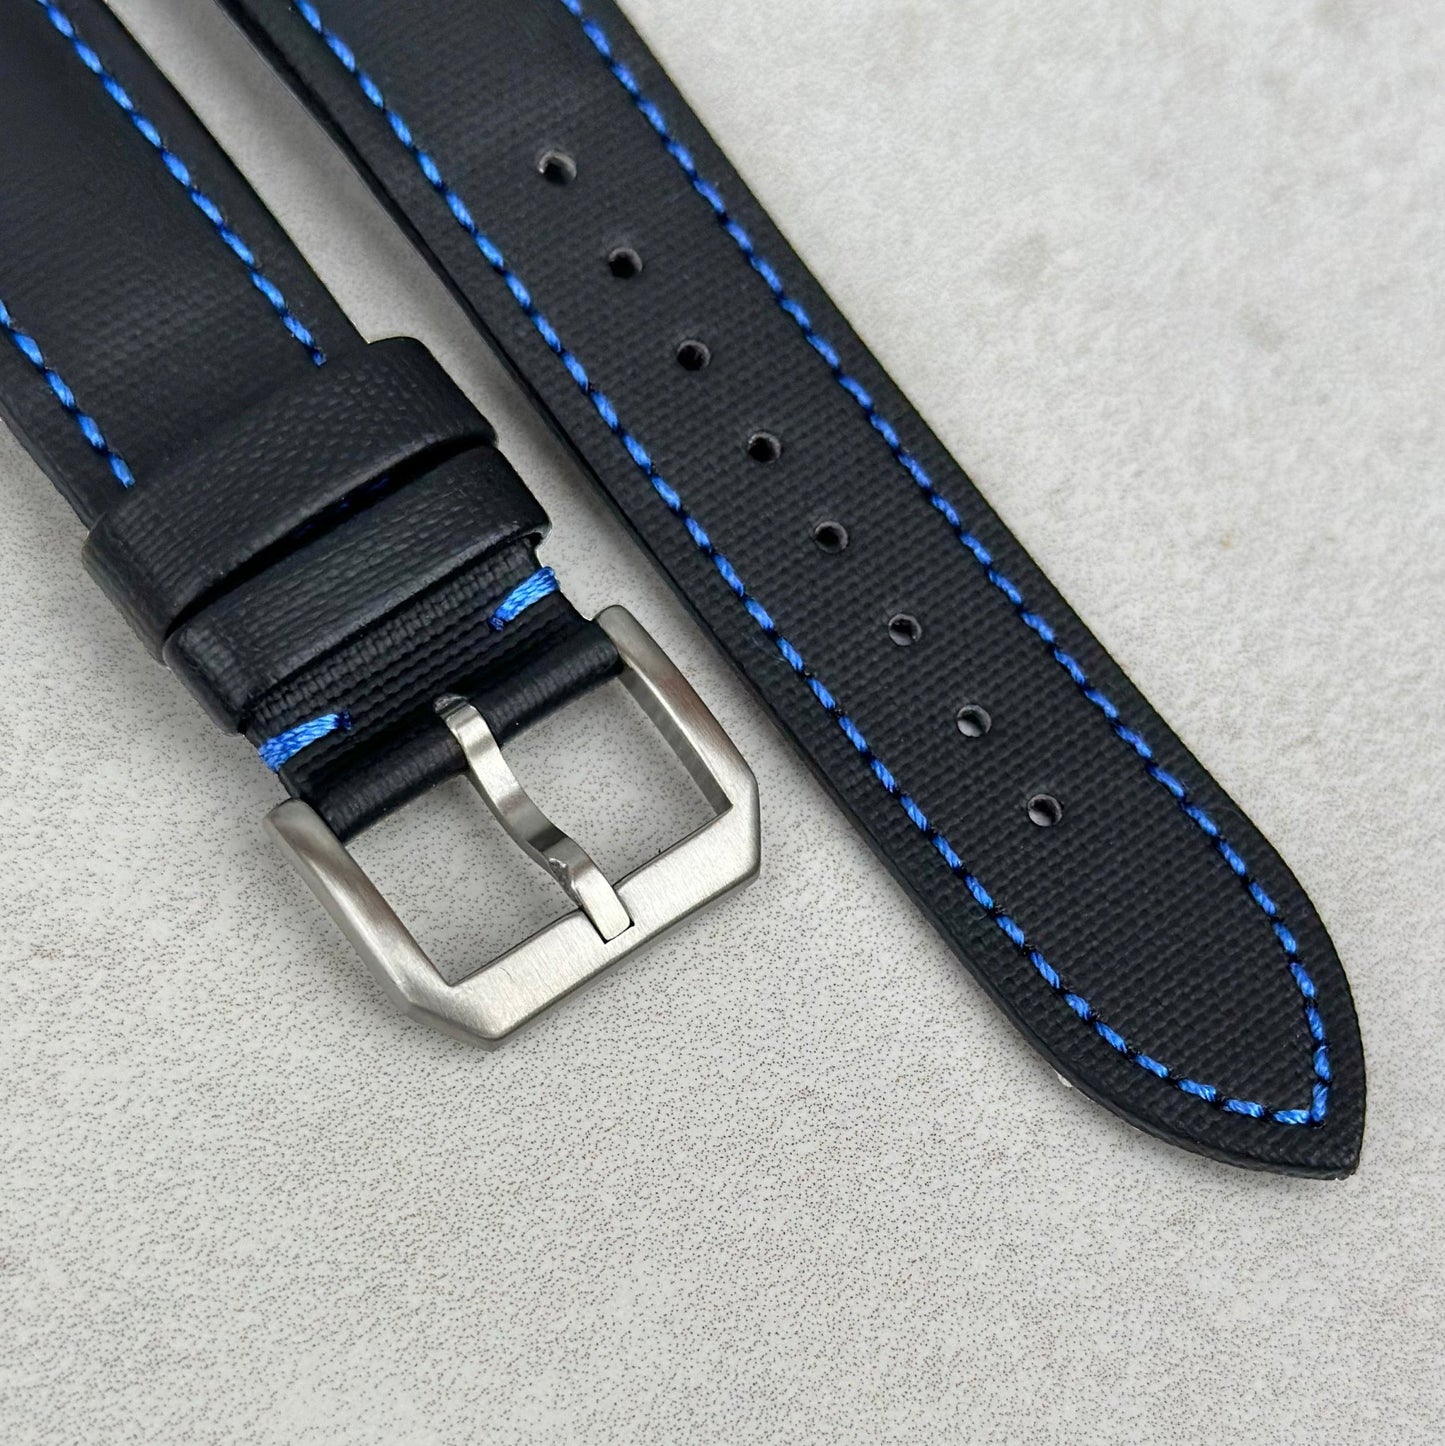 Brushed 316L stainless steel buckle on the jet black sail cloth Apple Watch strap with blue stitching. Watch And Strap